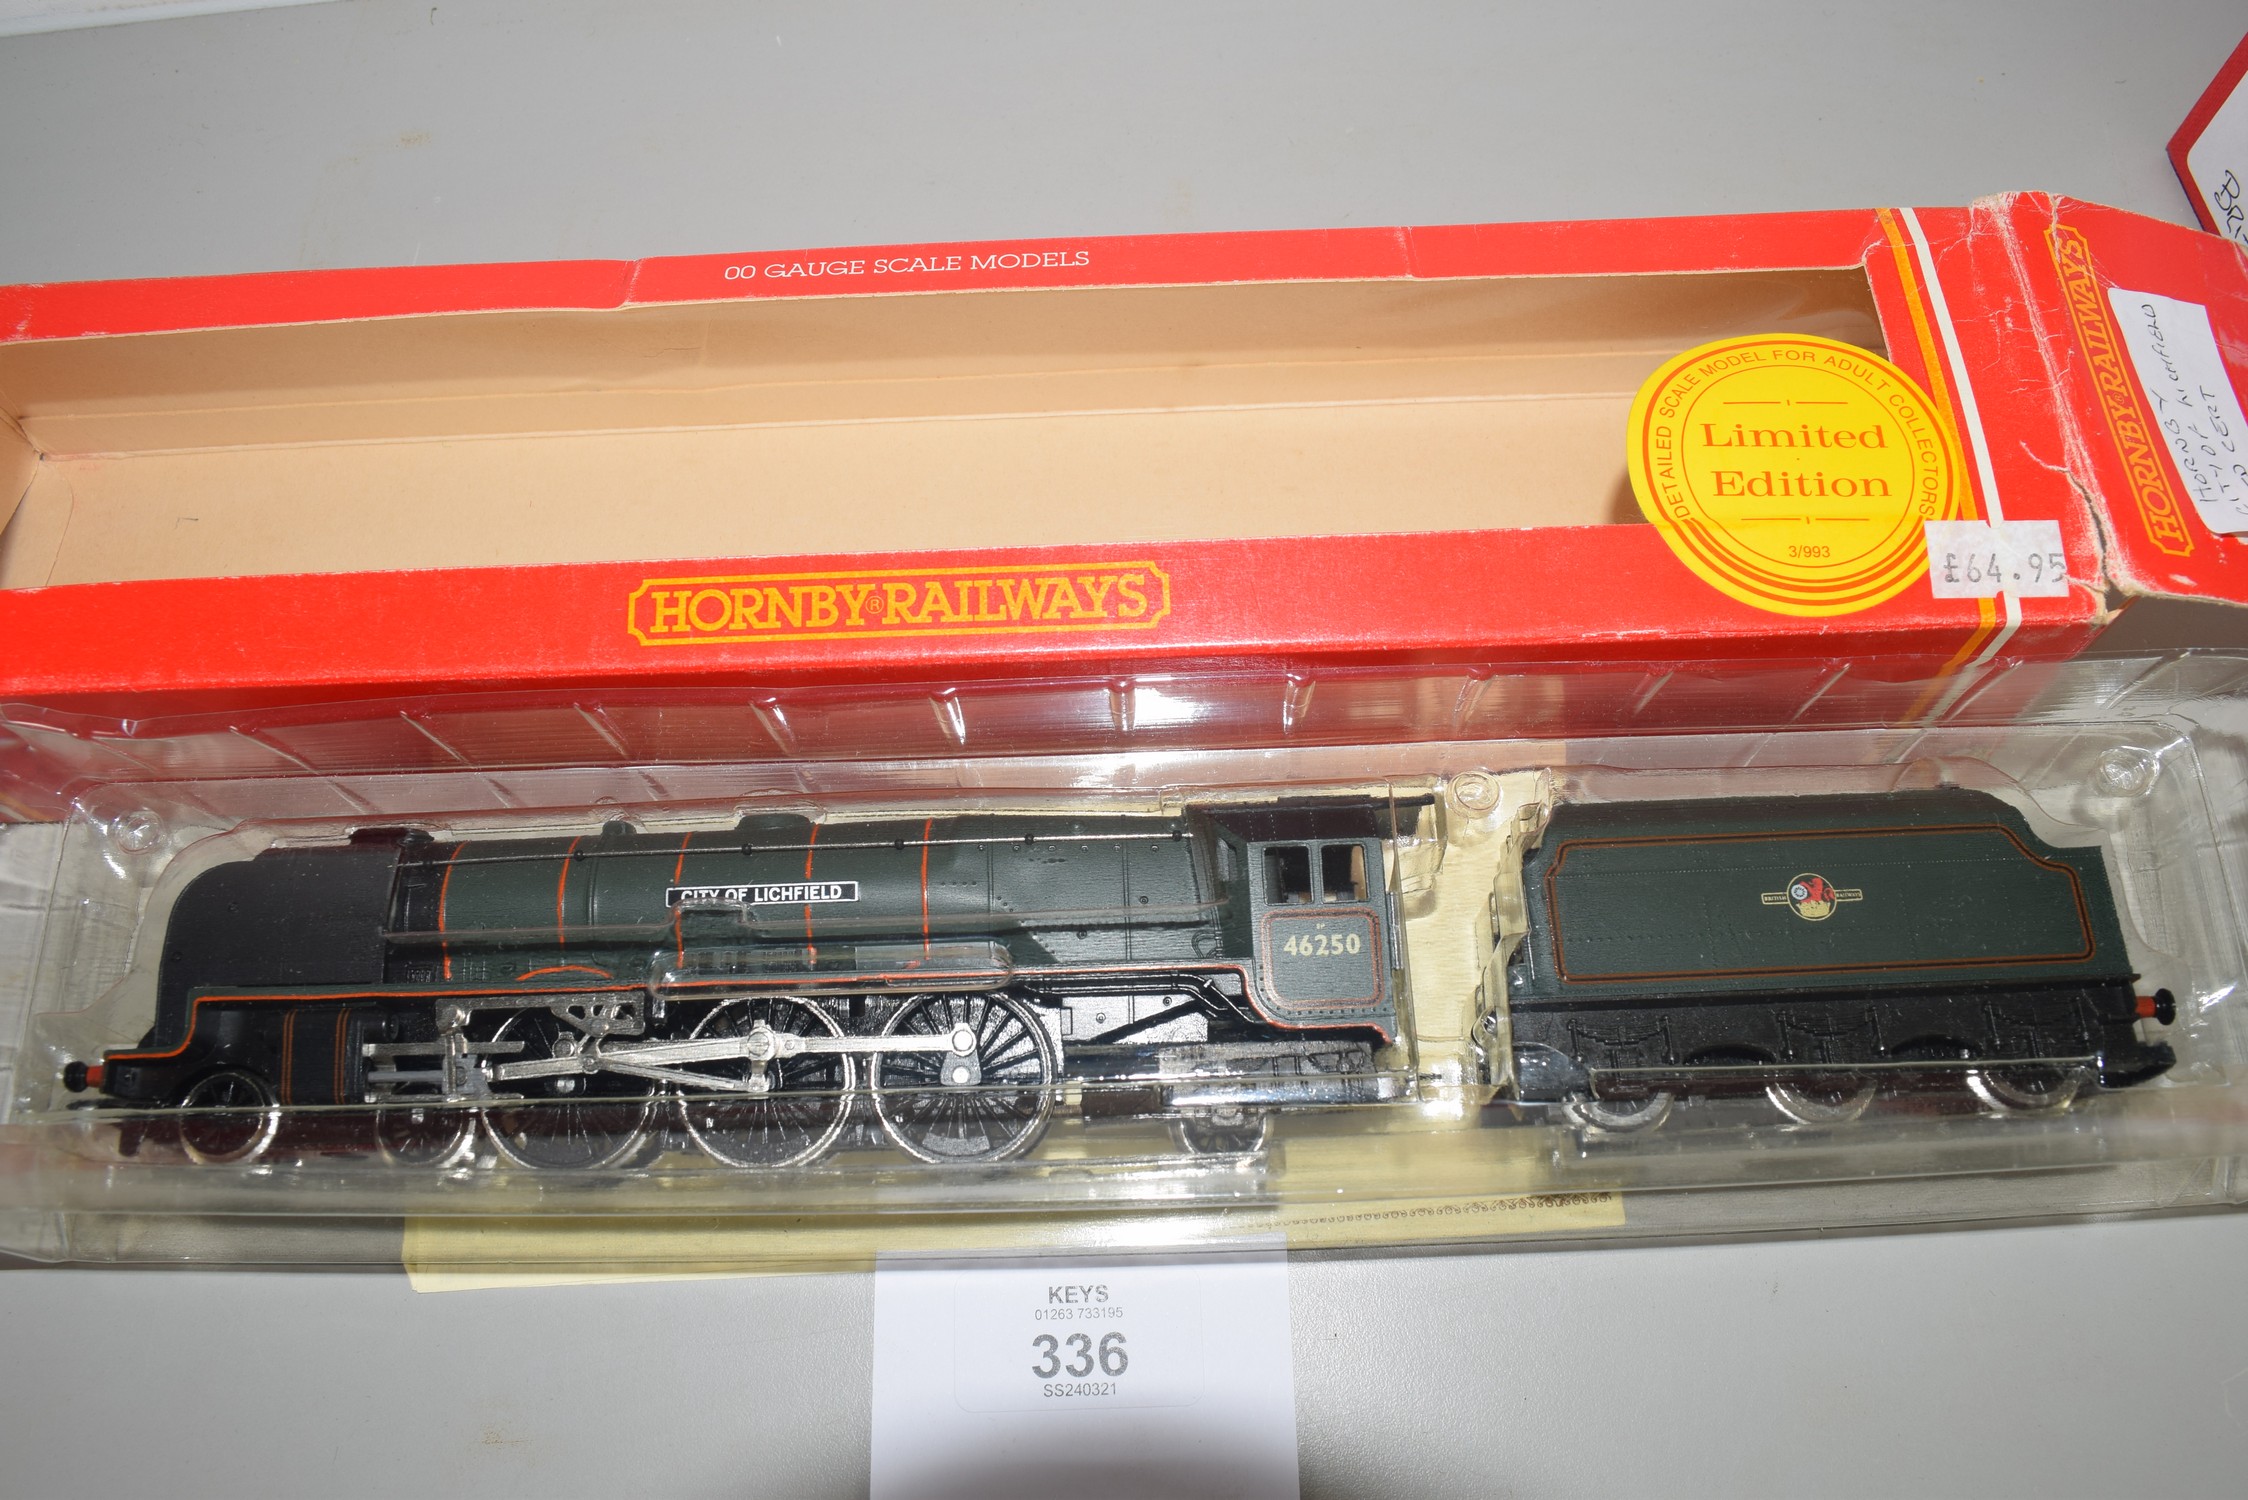 Boxed Hornby 00 gauge "City of Litchfield" No 46250 - Image 2 of 2